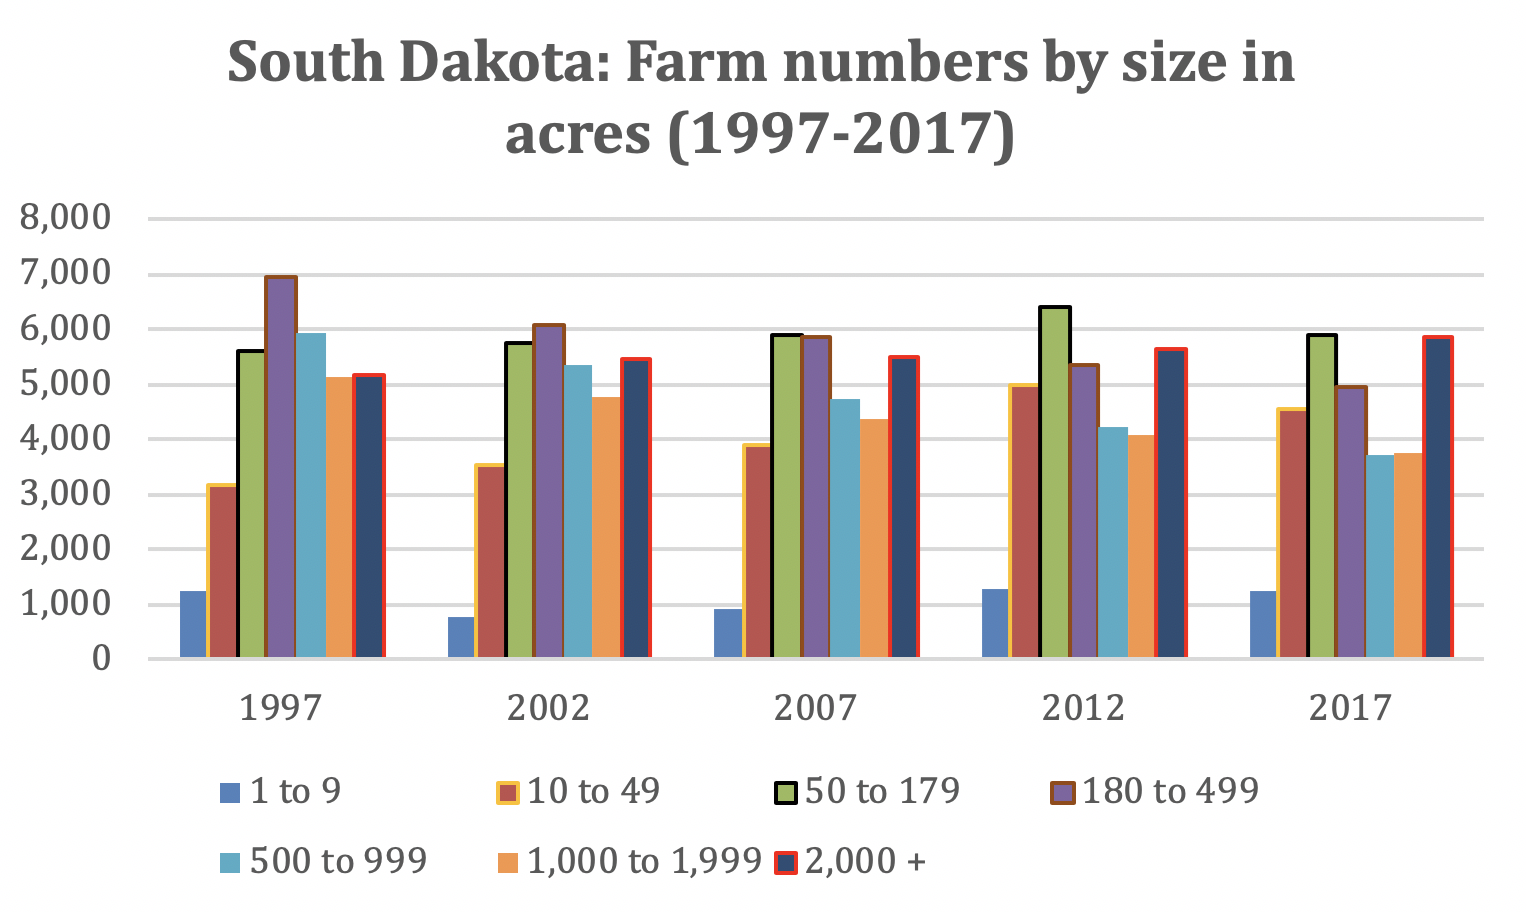 Bar Graph: South Dakota: Farm numbers by size in acres (1997-2017). For a complete description, contact Alvaro Garcia at 605-688-4940.